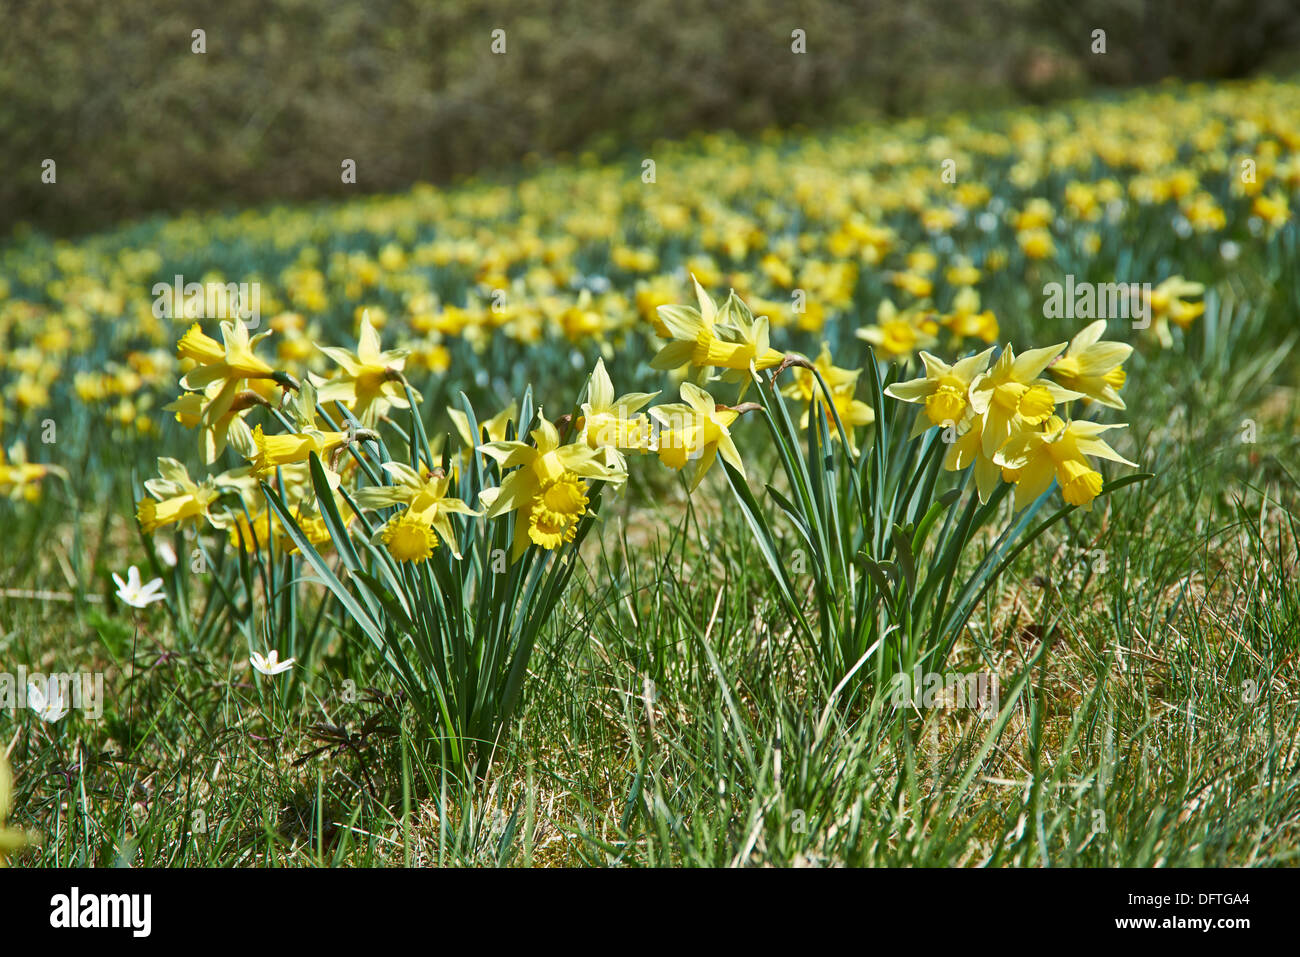 wild yellow Narcissus or Daffodils (Narcissus pseudonarcissus), Perlenbachtal, National Park Eifel, Monschau-Hoefen, Germany Stock Photo